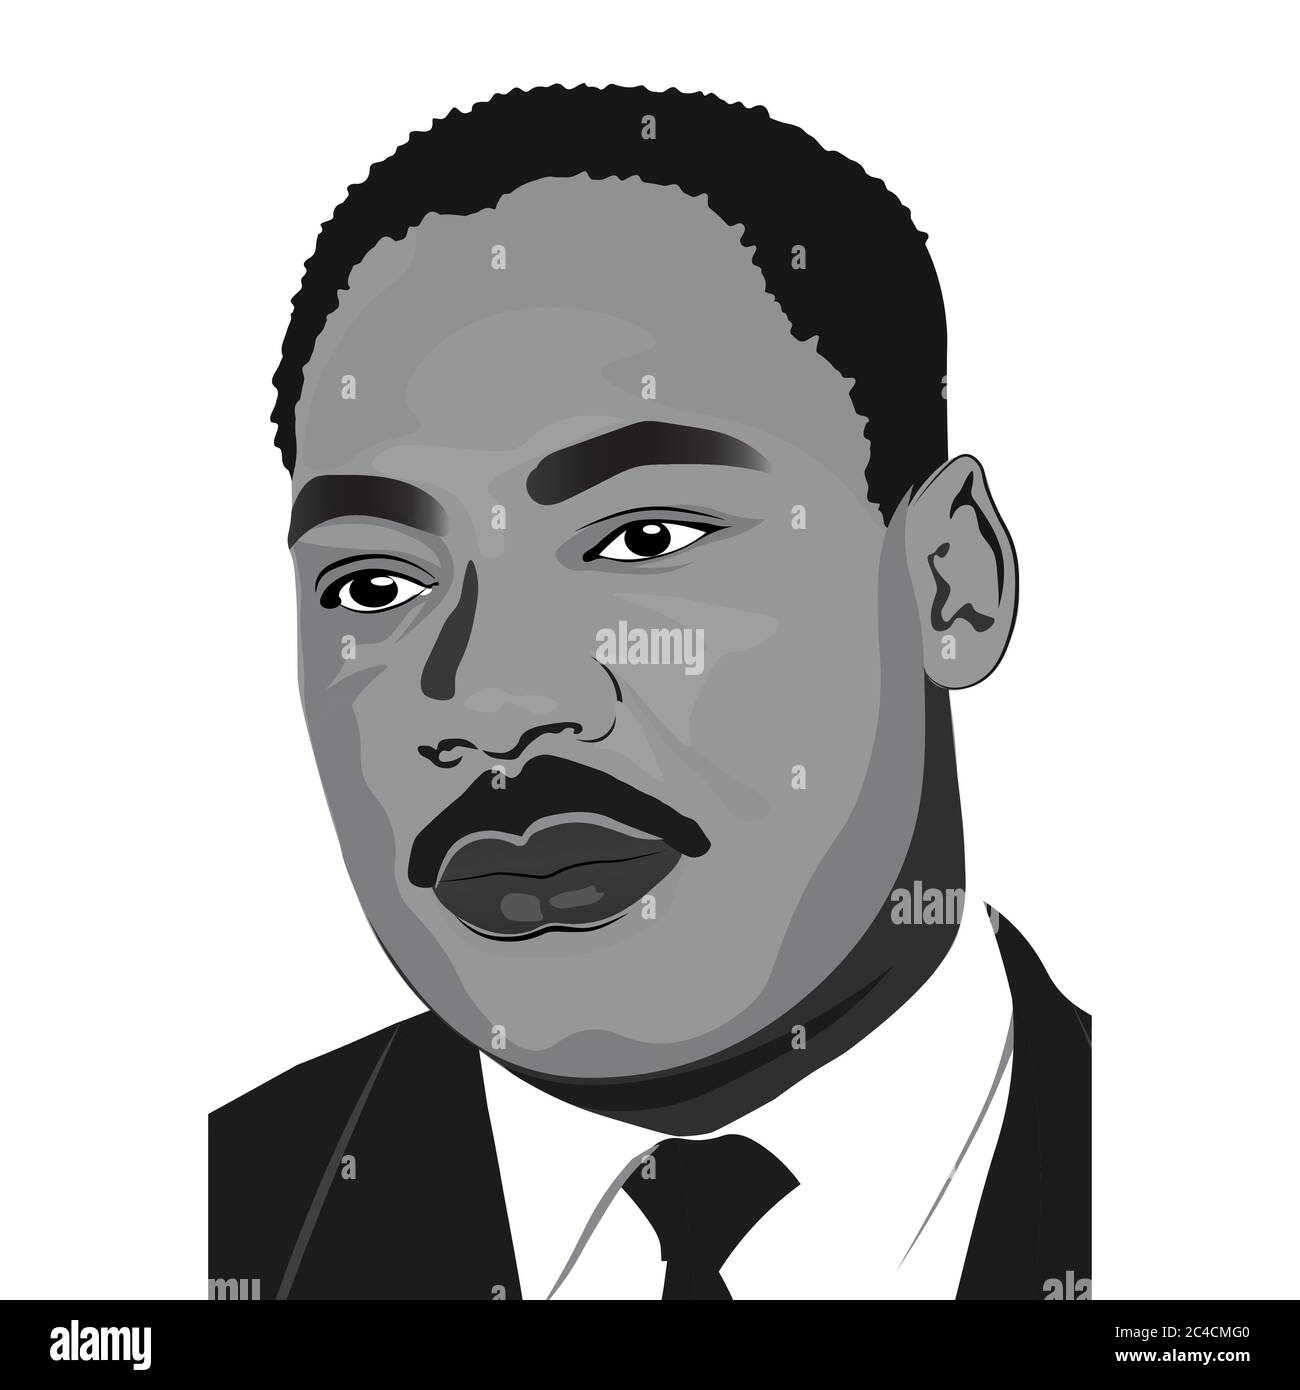 MLK Martin Luther King Jr. Day greeting card background.  I have a dream inspirational quote. Martin Luther Jr. King Portrait. Martin Luther King Jr. Stock Vector